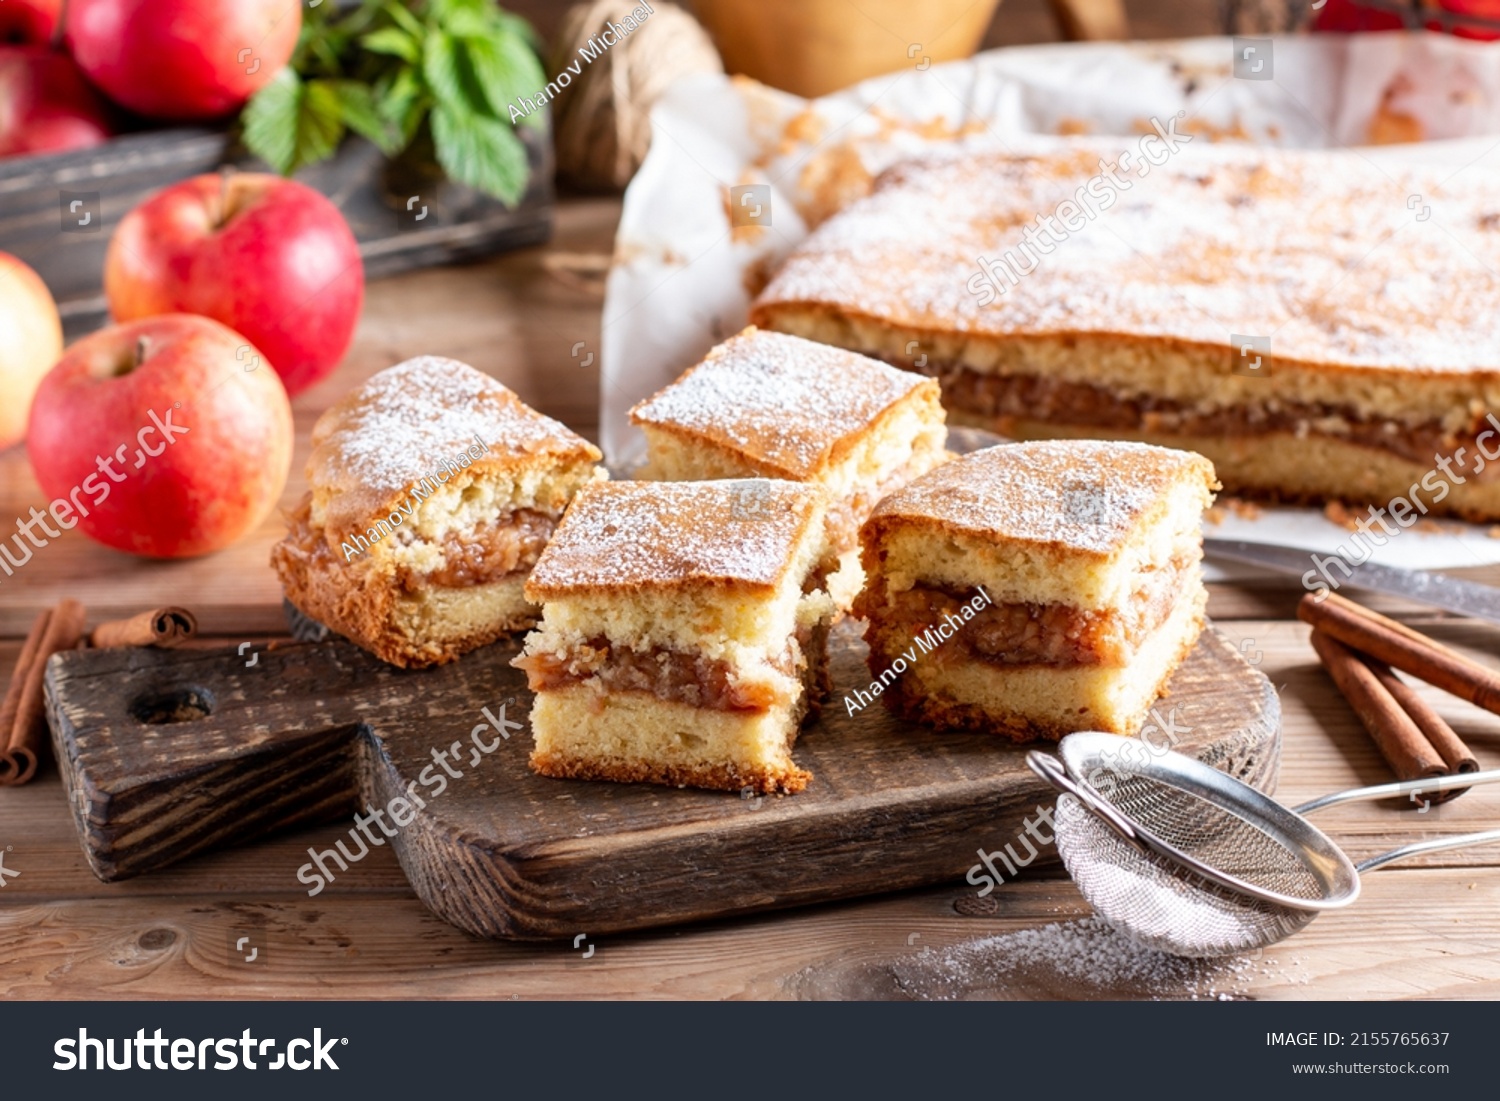 Sponge cake with apples on a wooden board on the table. Homemade pie #2155765637